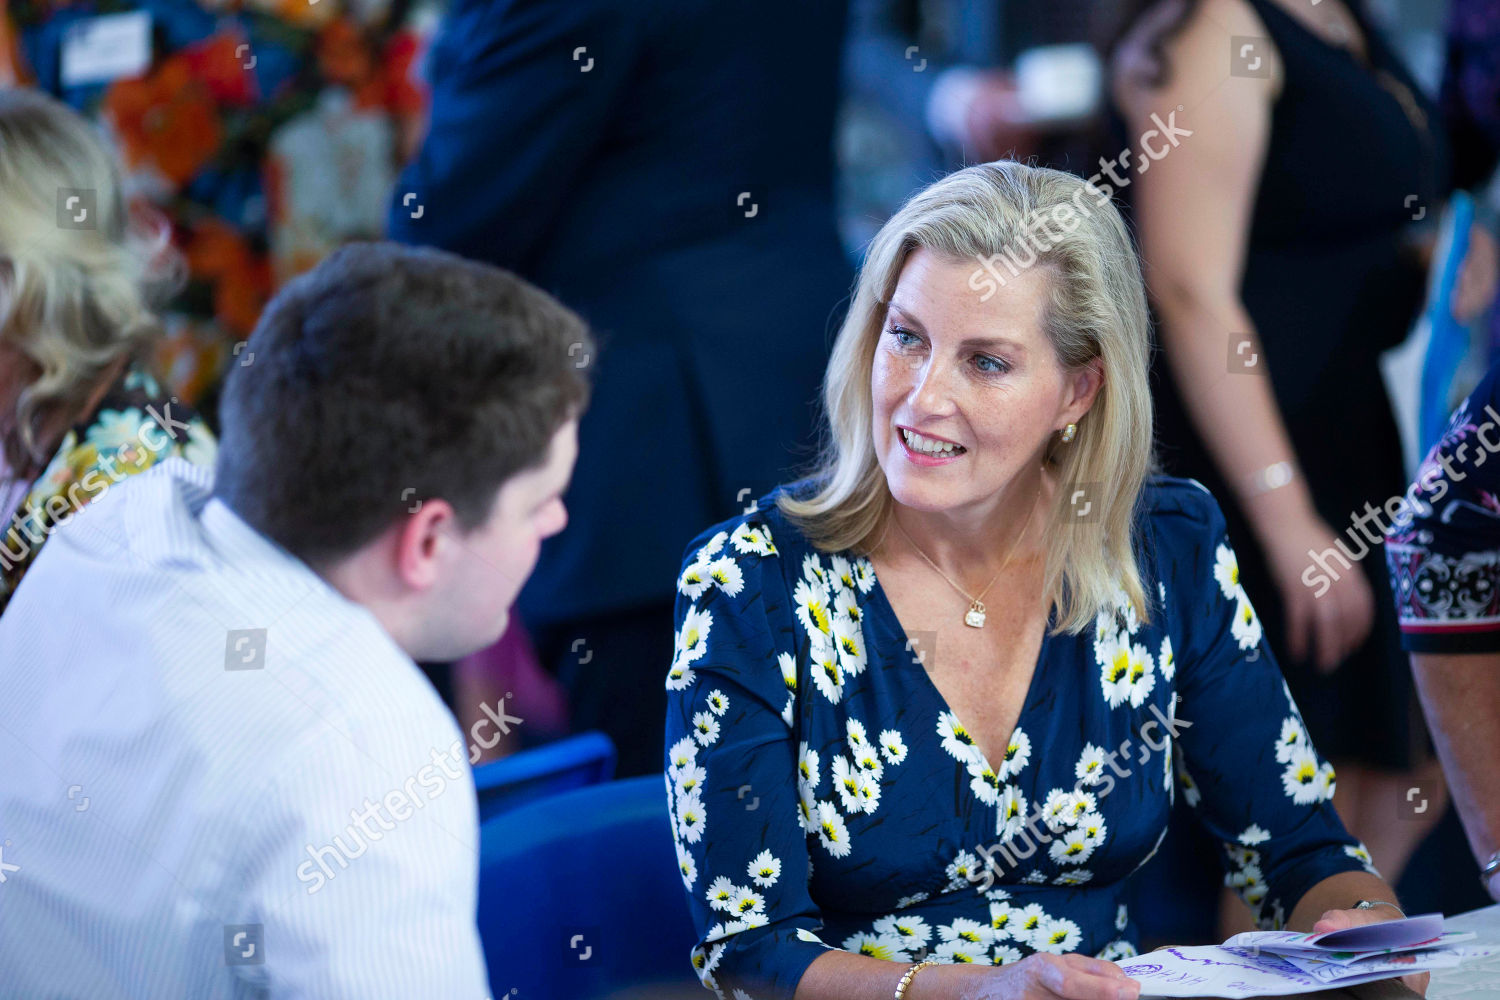 sophie-countess-of-wessex-visits-the-me2-club-tea-party-woodley-uk-shutterstock-editorial-9885213t.jpg